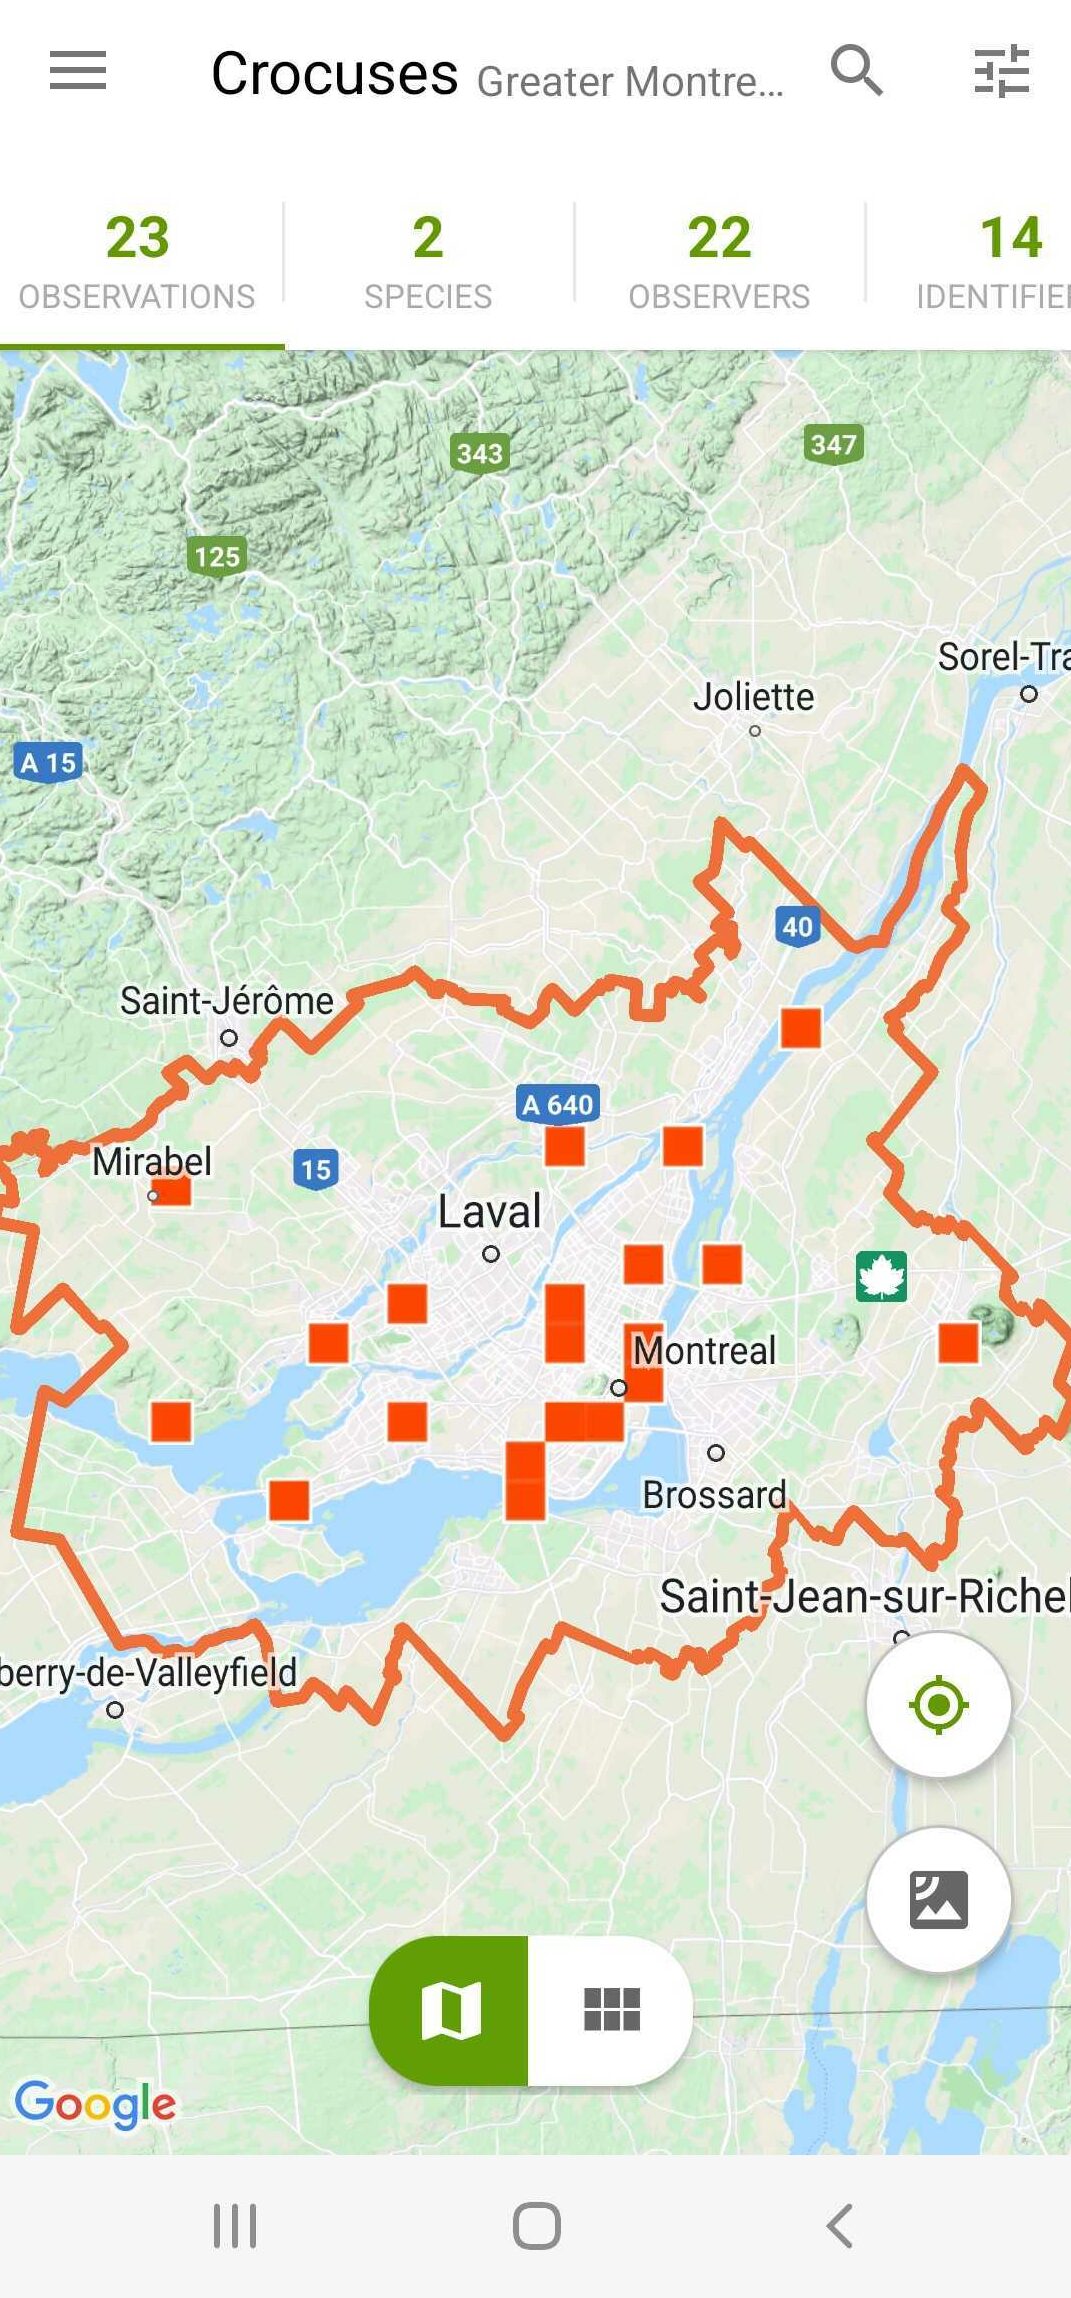 A screenshot of an iNaturalist map of crocus locations in Montreal